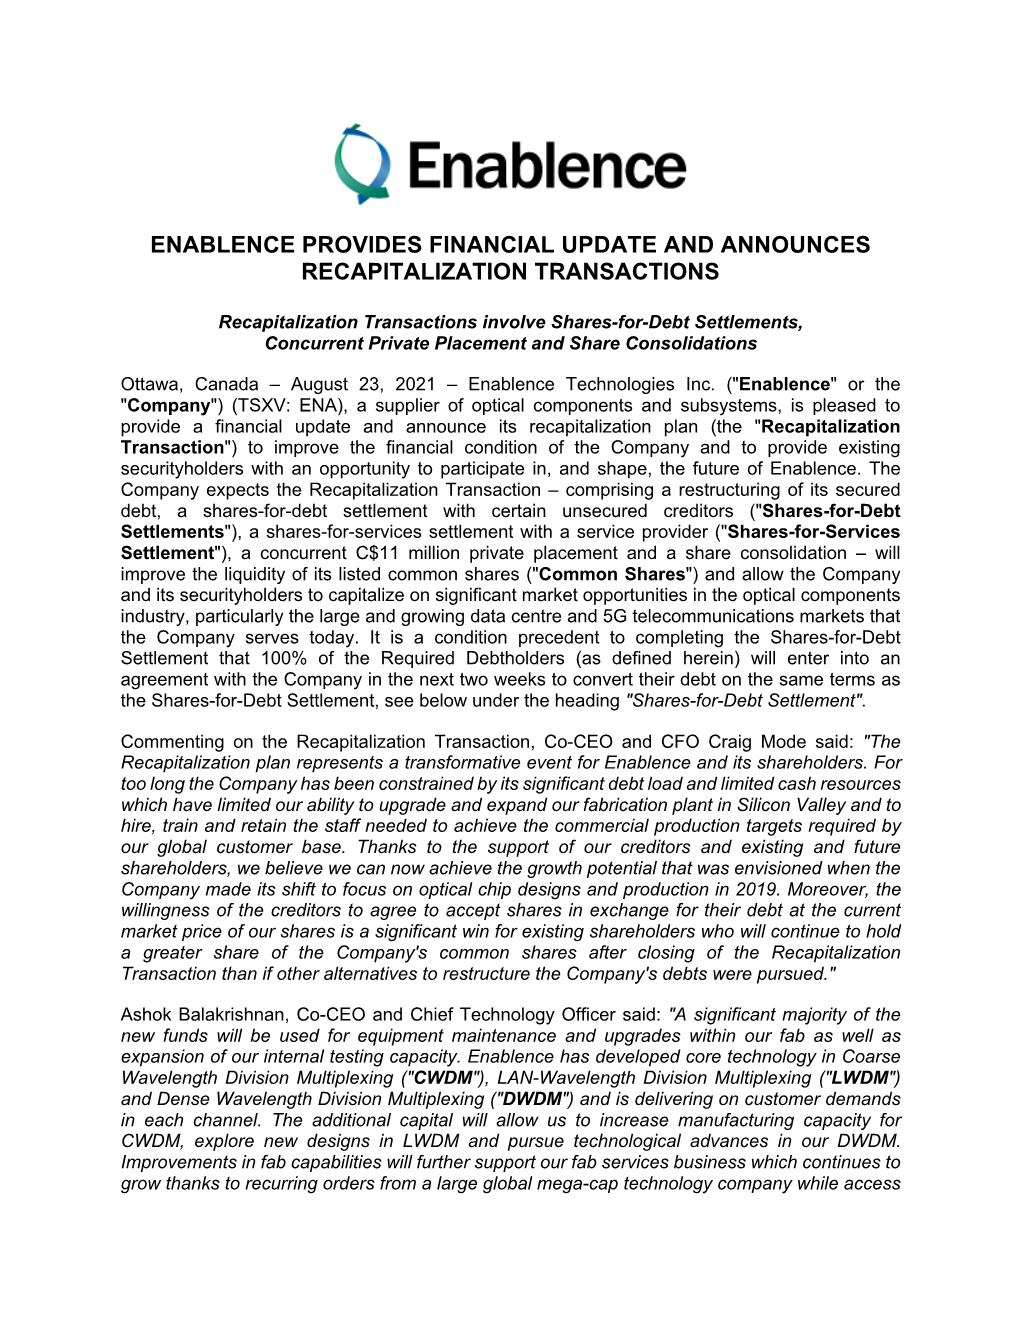 Enablence Provides Financial Update and Announces Recapitalization Transactions